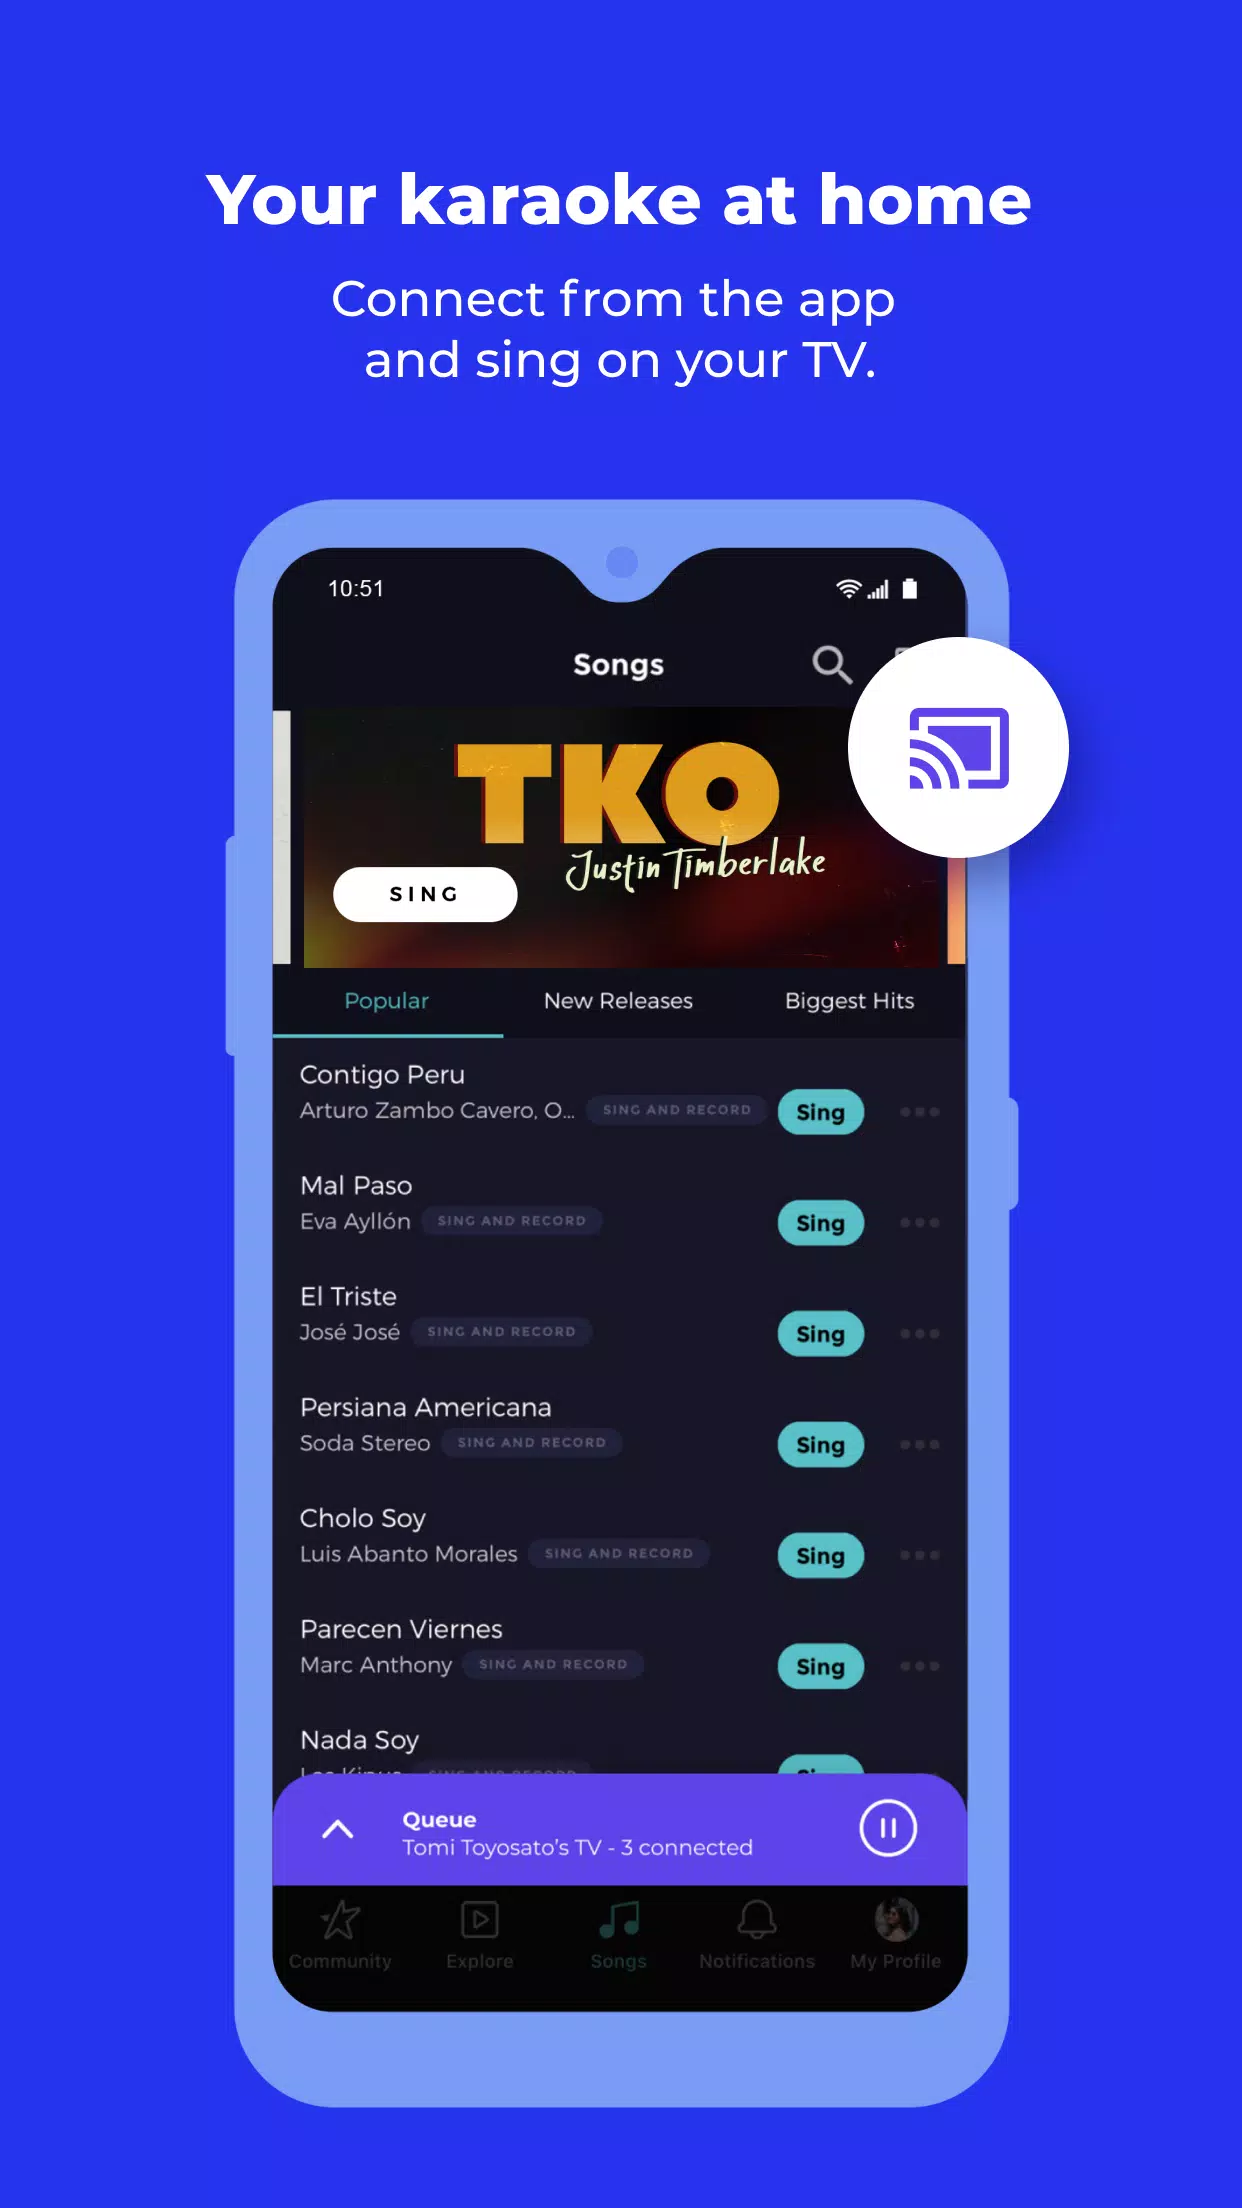 Stream episode Apkkingo is a site for download free APK games and app on  the phone by Apkkingo podcast